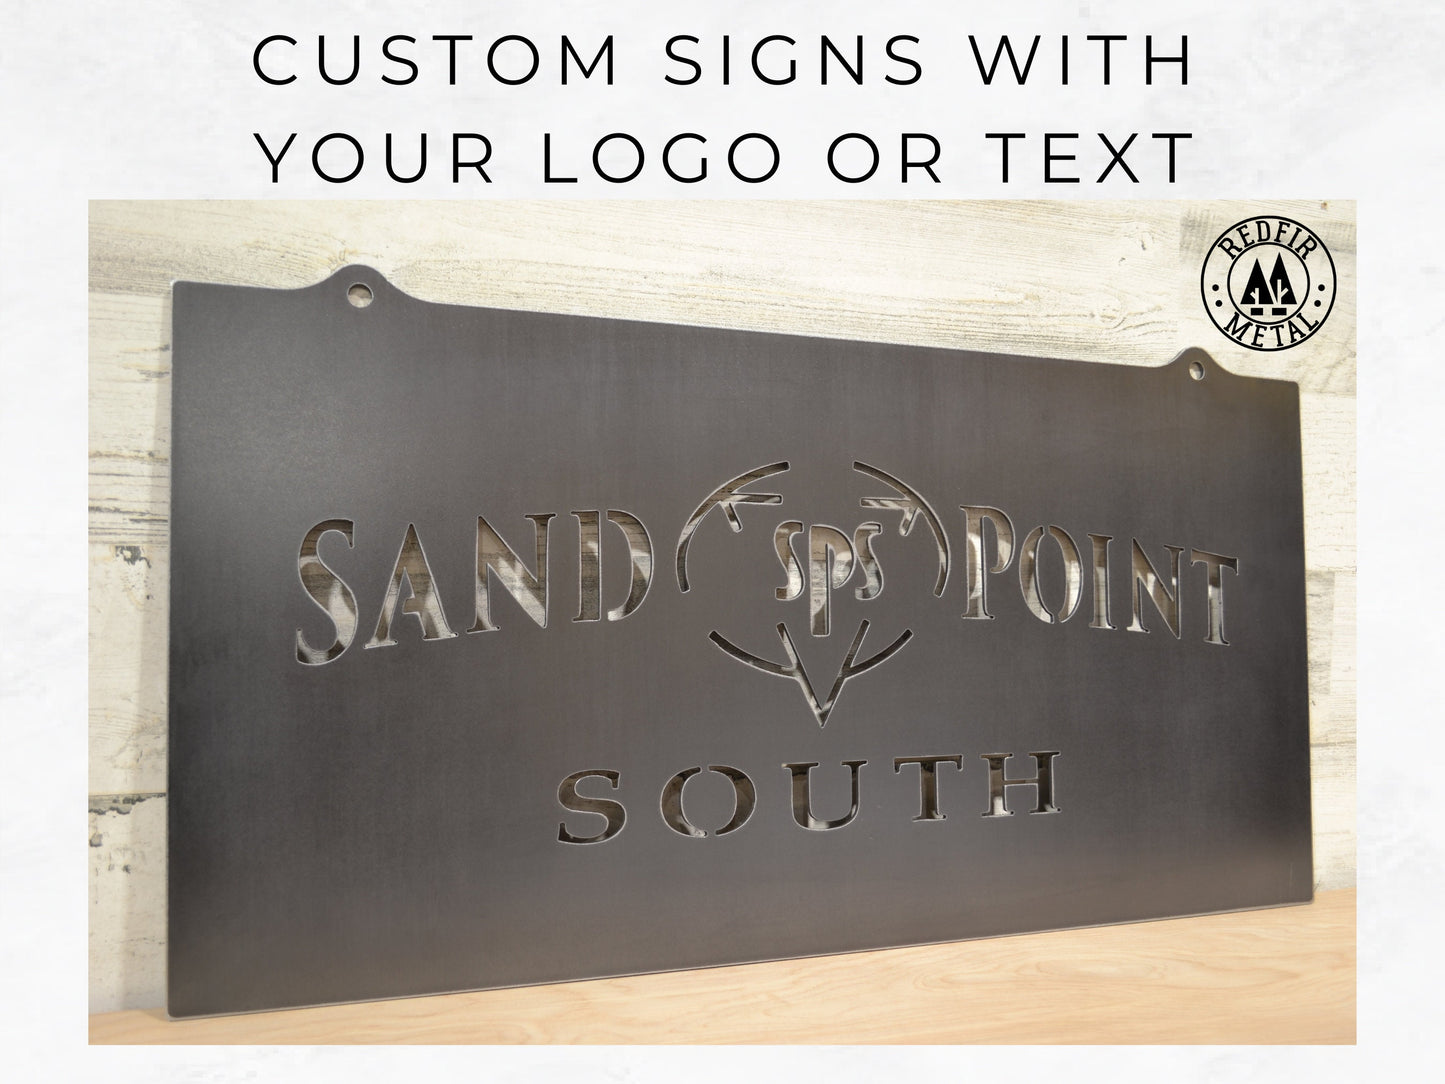 Business Logo or Artwork - Custom Metal Sign - Personalized Gifts - Metal Wall Decor - Large, Small, Square, Circle Sign - Special Gifts